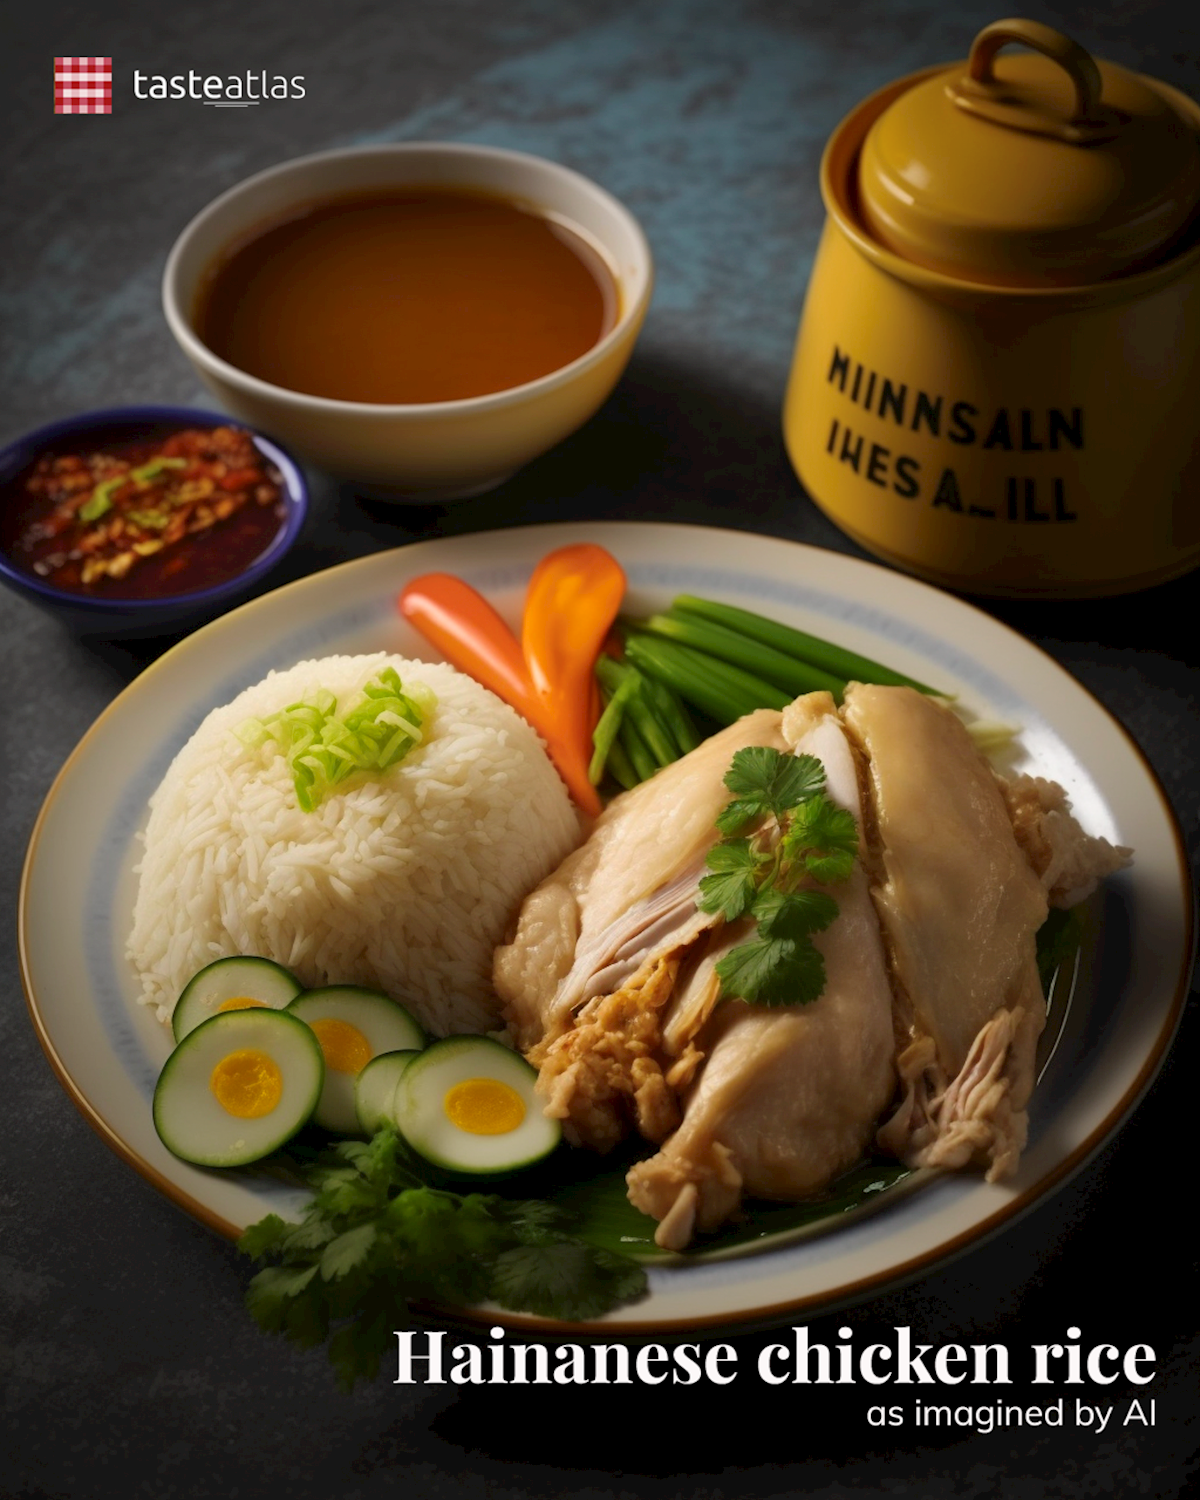 Prompt: Imagine authentic Hainanese chicken rice